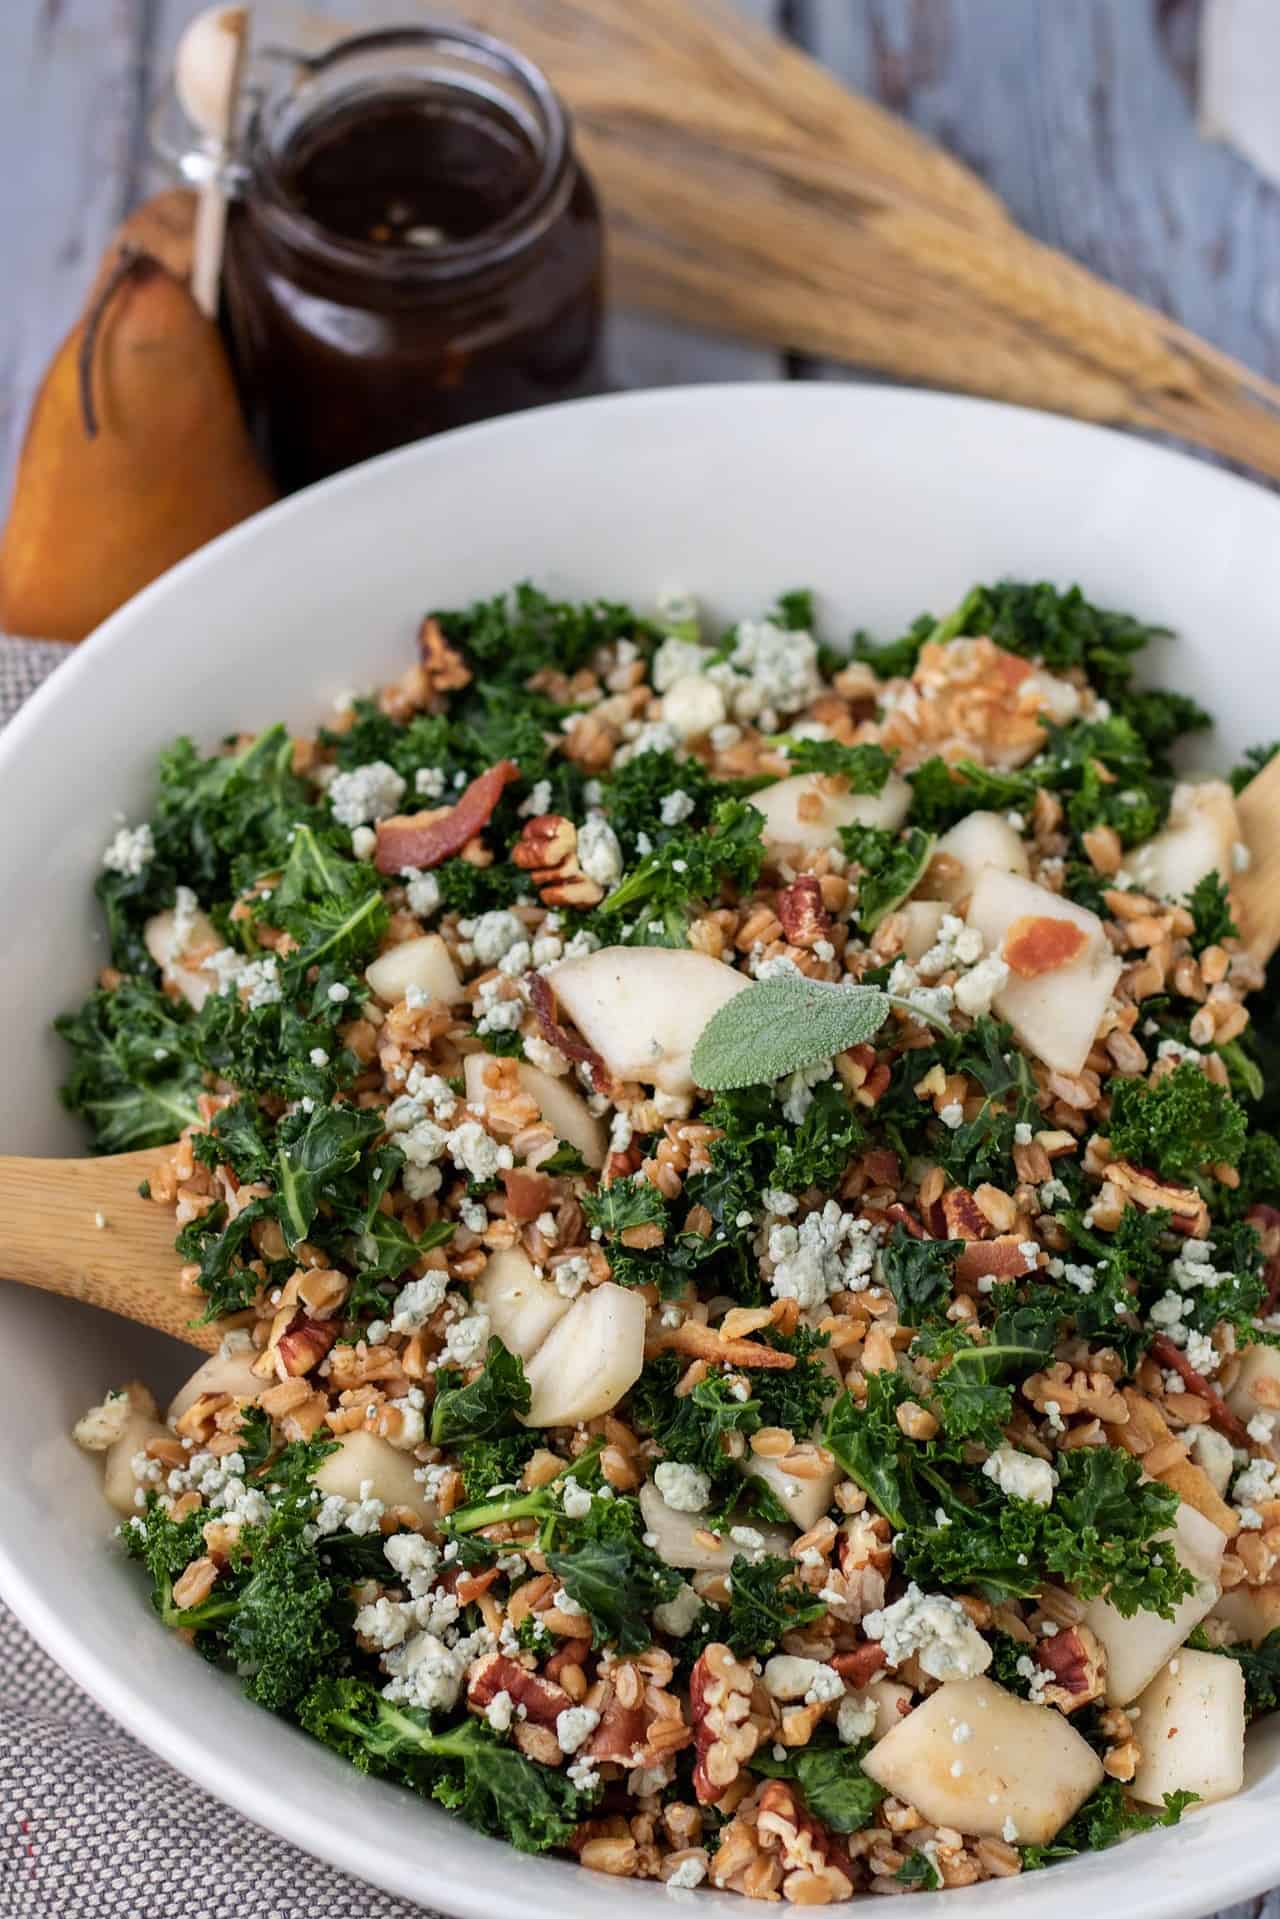 a large white serving bowl filled with kale and farro salad. It's got a fresh sage leaf on top and two wooden serving utensils in the salad. The small glass jar of balsamic fig dressing is in the background with a whole pear and dried wheat stalks.